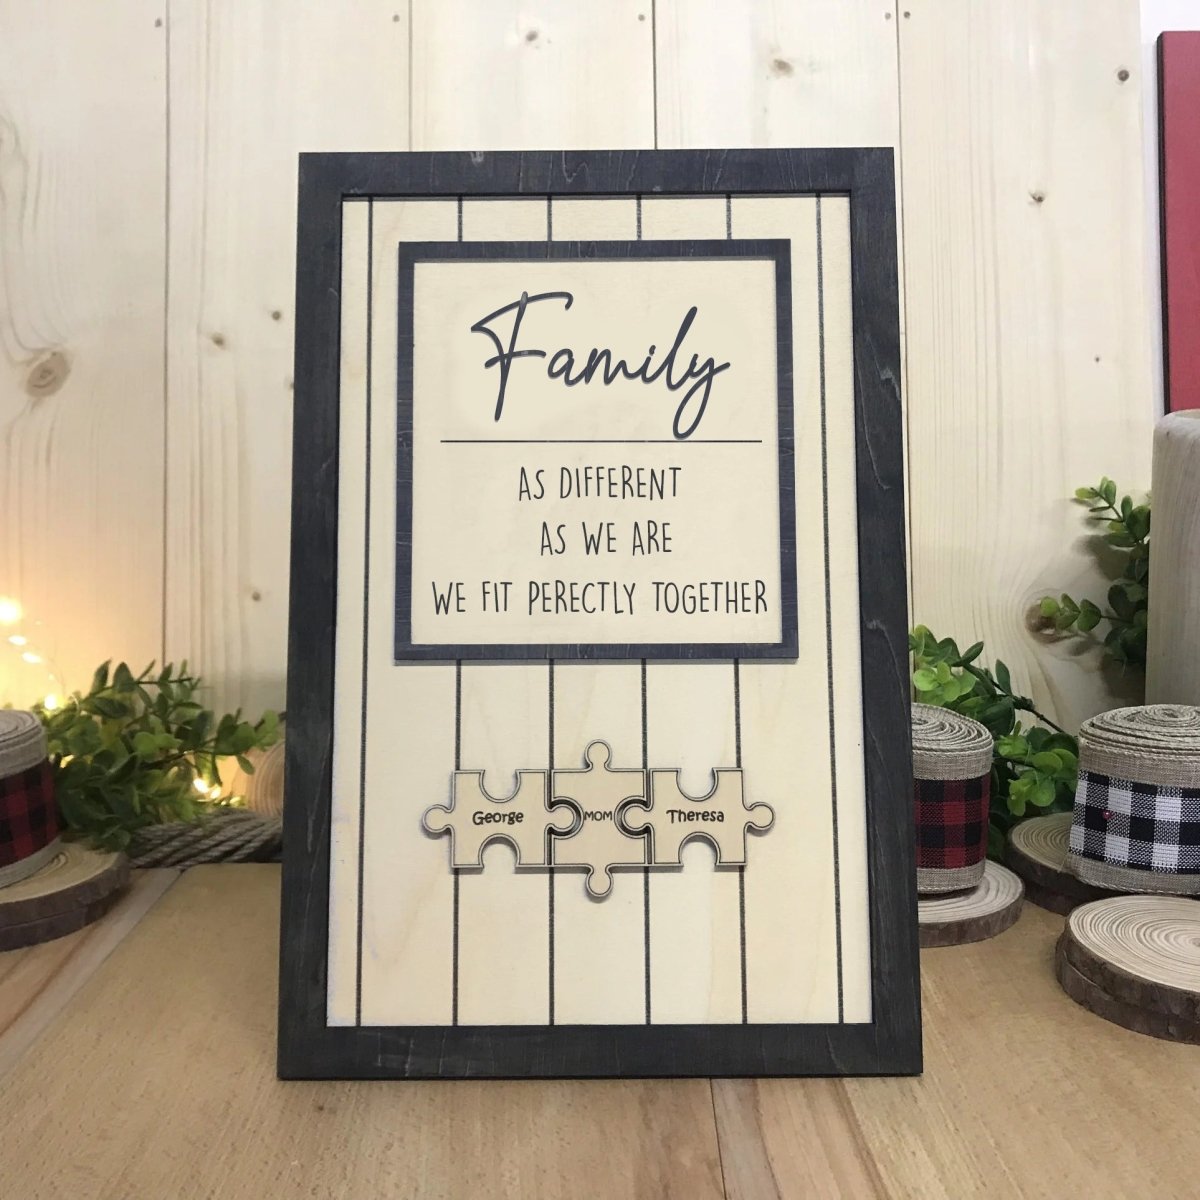 3D Puzzle Sign - Family As different as we are - TT0422HN - Giftago